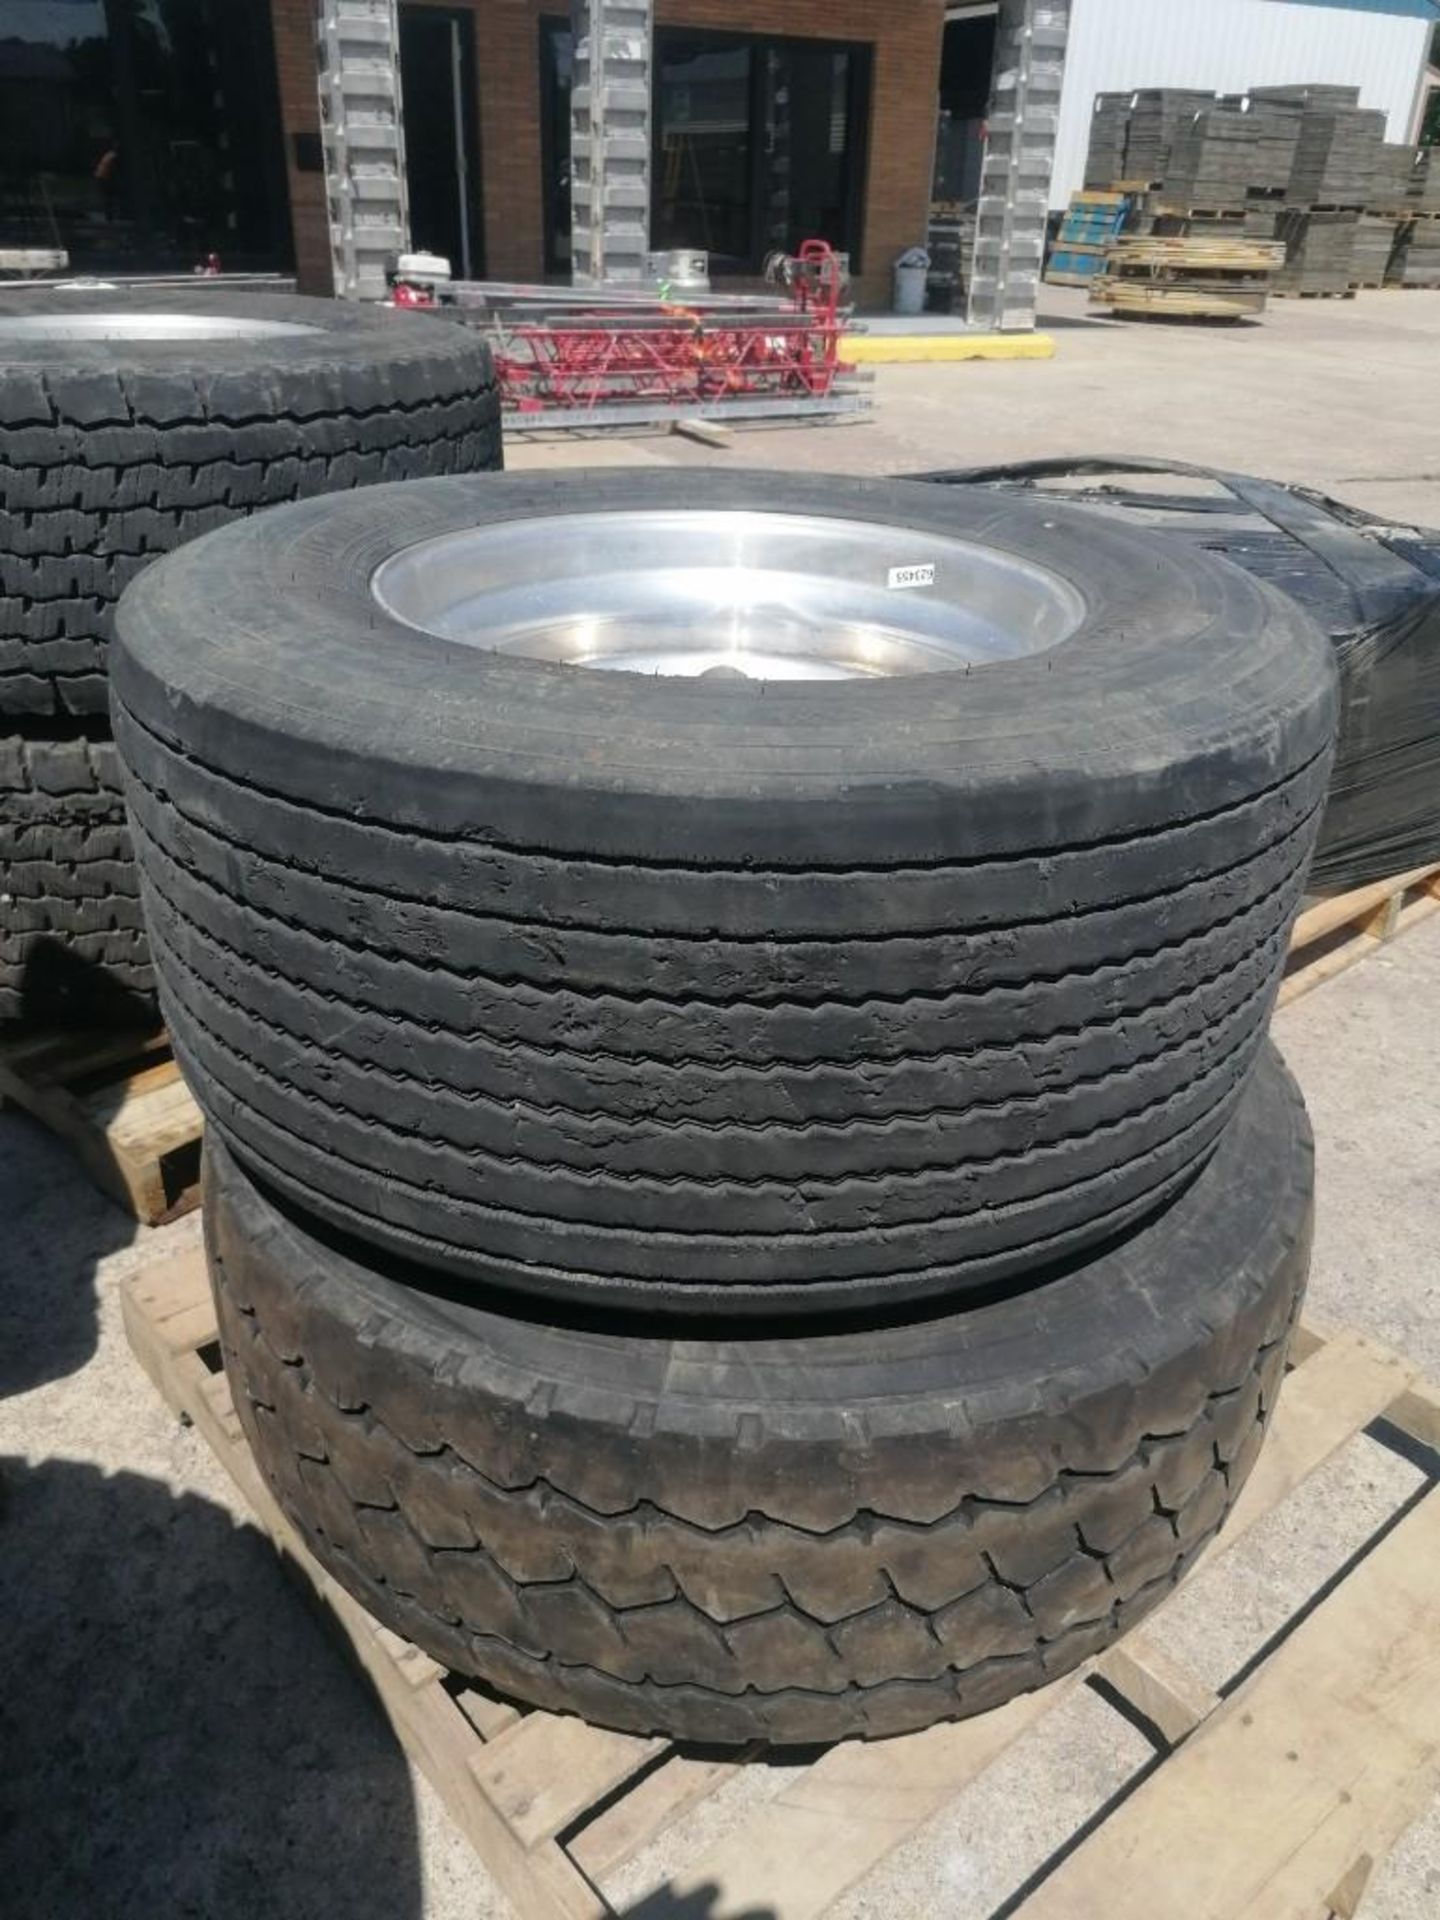 (2) Michelin 445/ 50R 22.5 Drive Tires with Rims. Located at 301 E Henry Street, Mt. Pleasant, IA